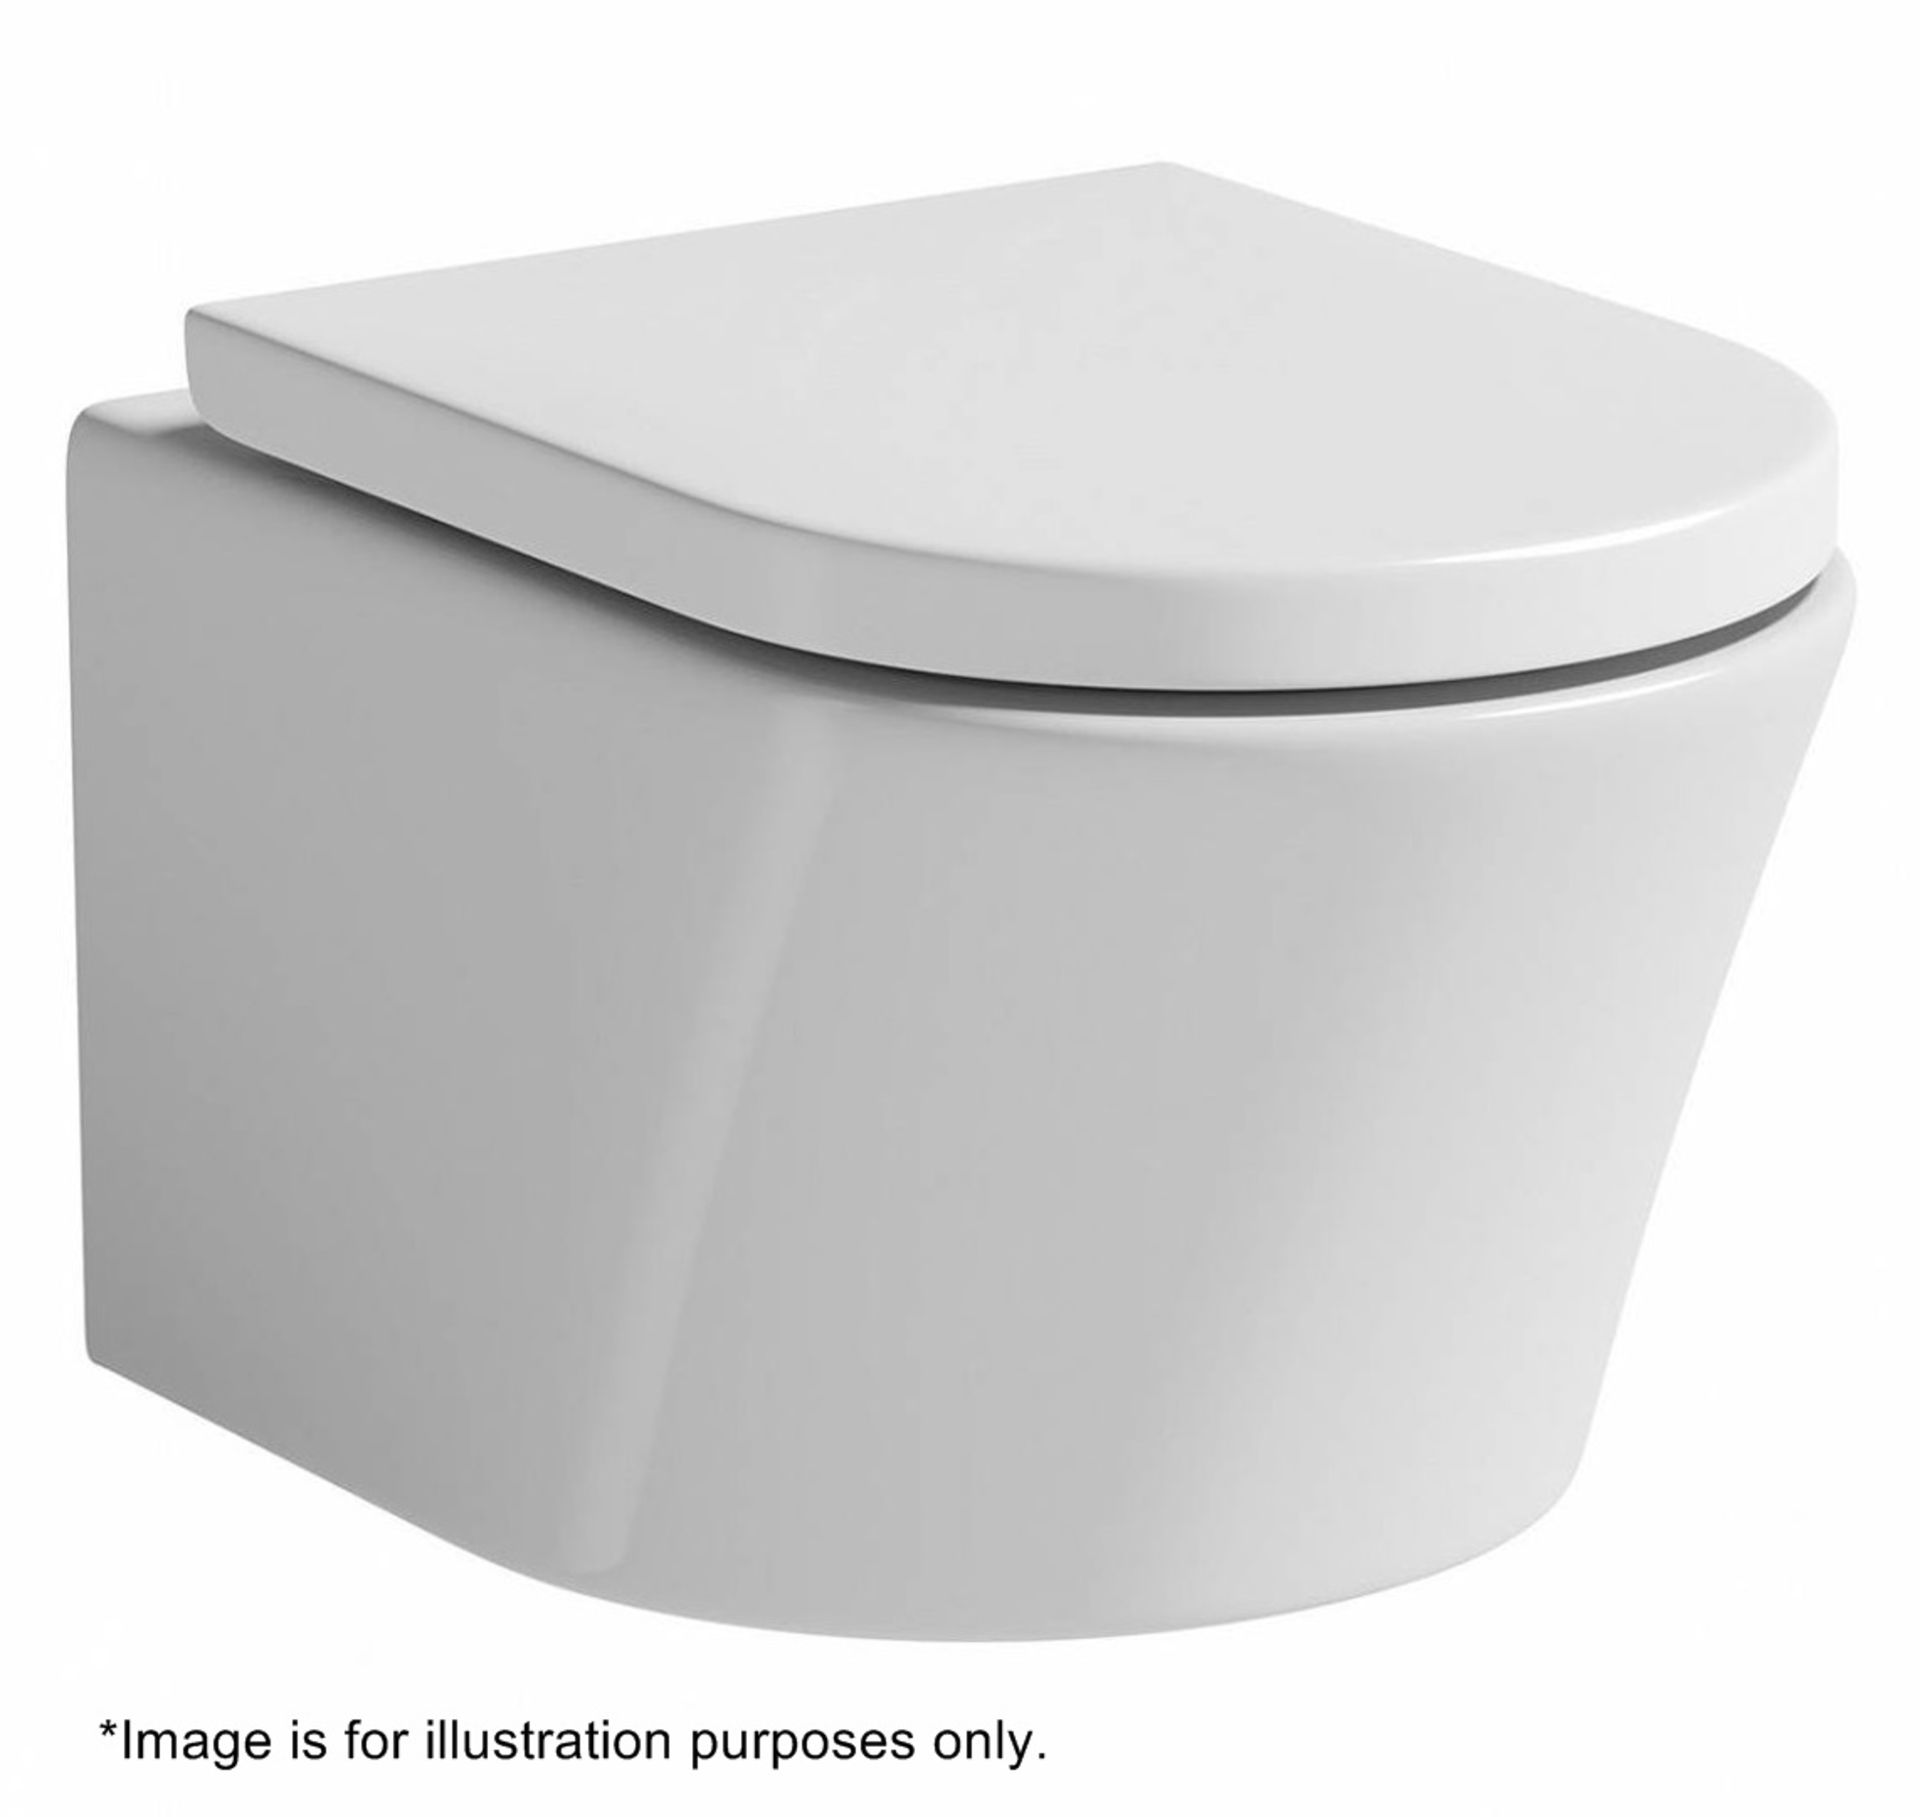 1 x ARC (AKA Arte) Wall Hung Toilet Pan With Seat - Ref: GMJ026A - Unused Stock - CL190 - - Image 2 of 2